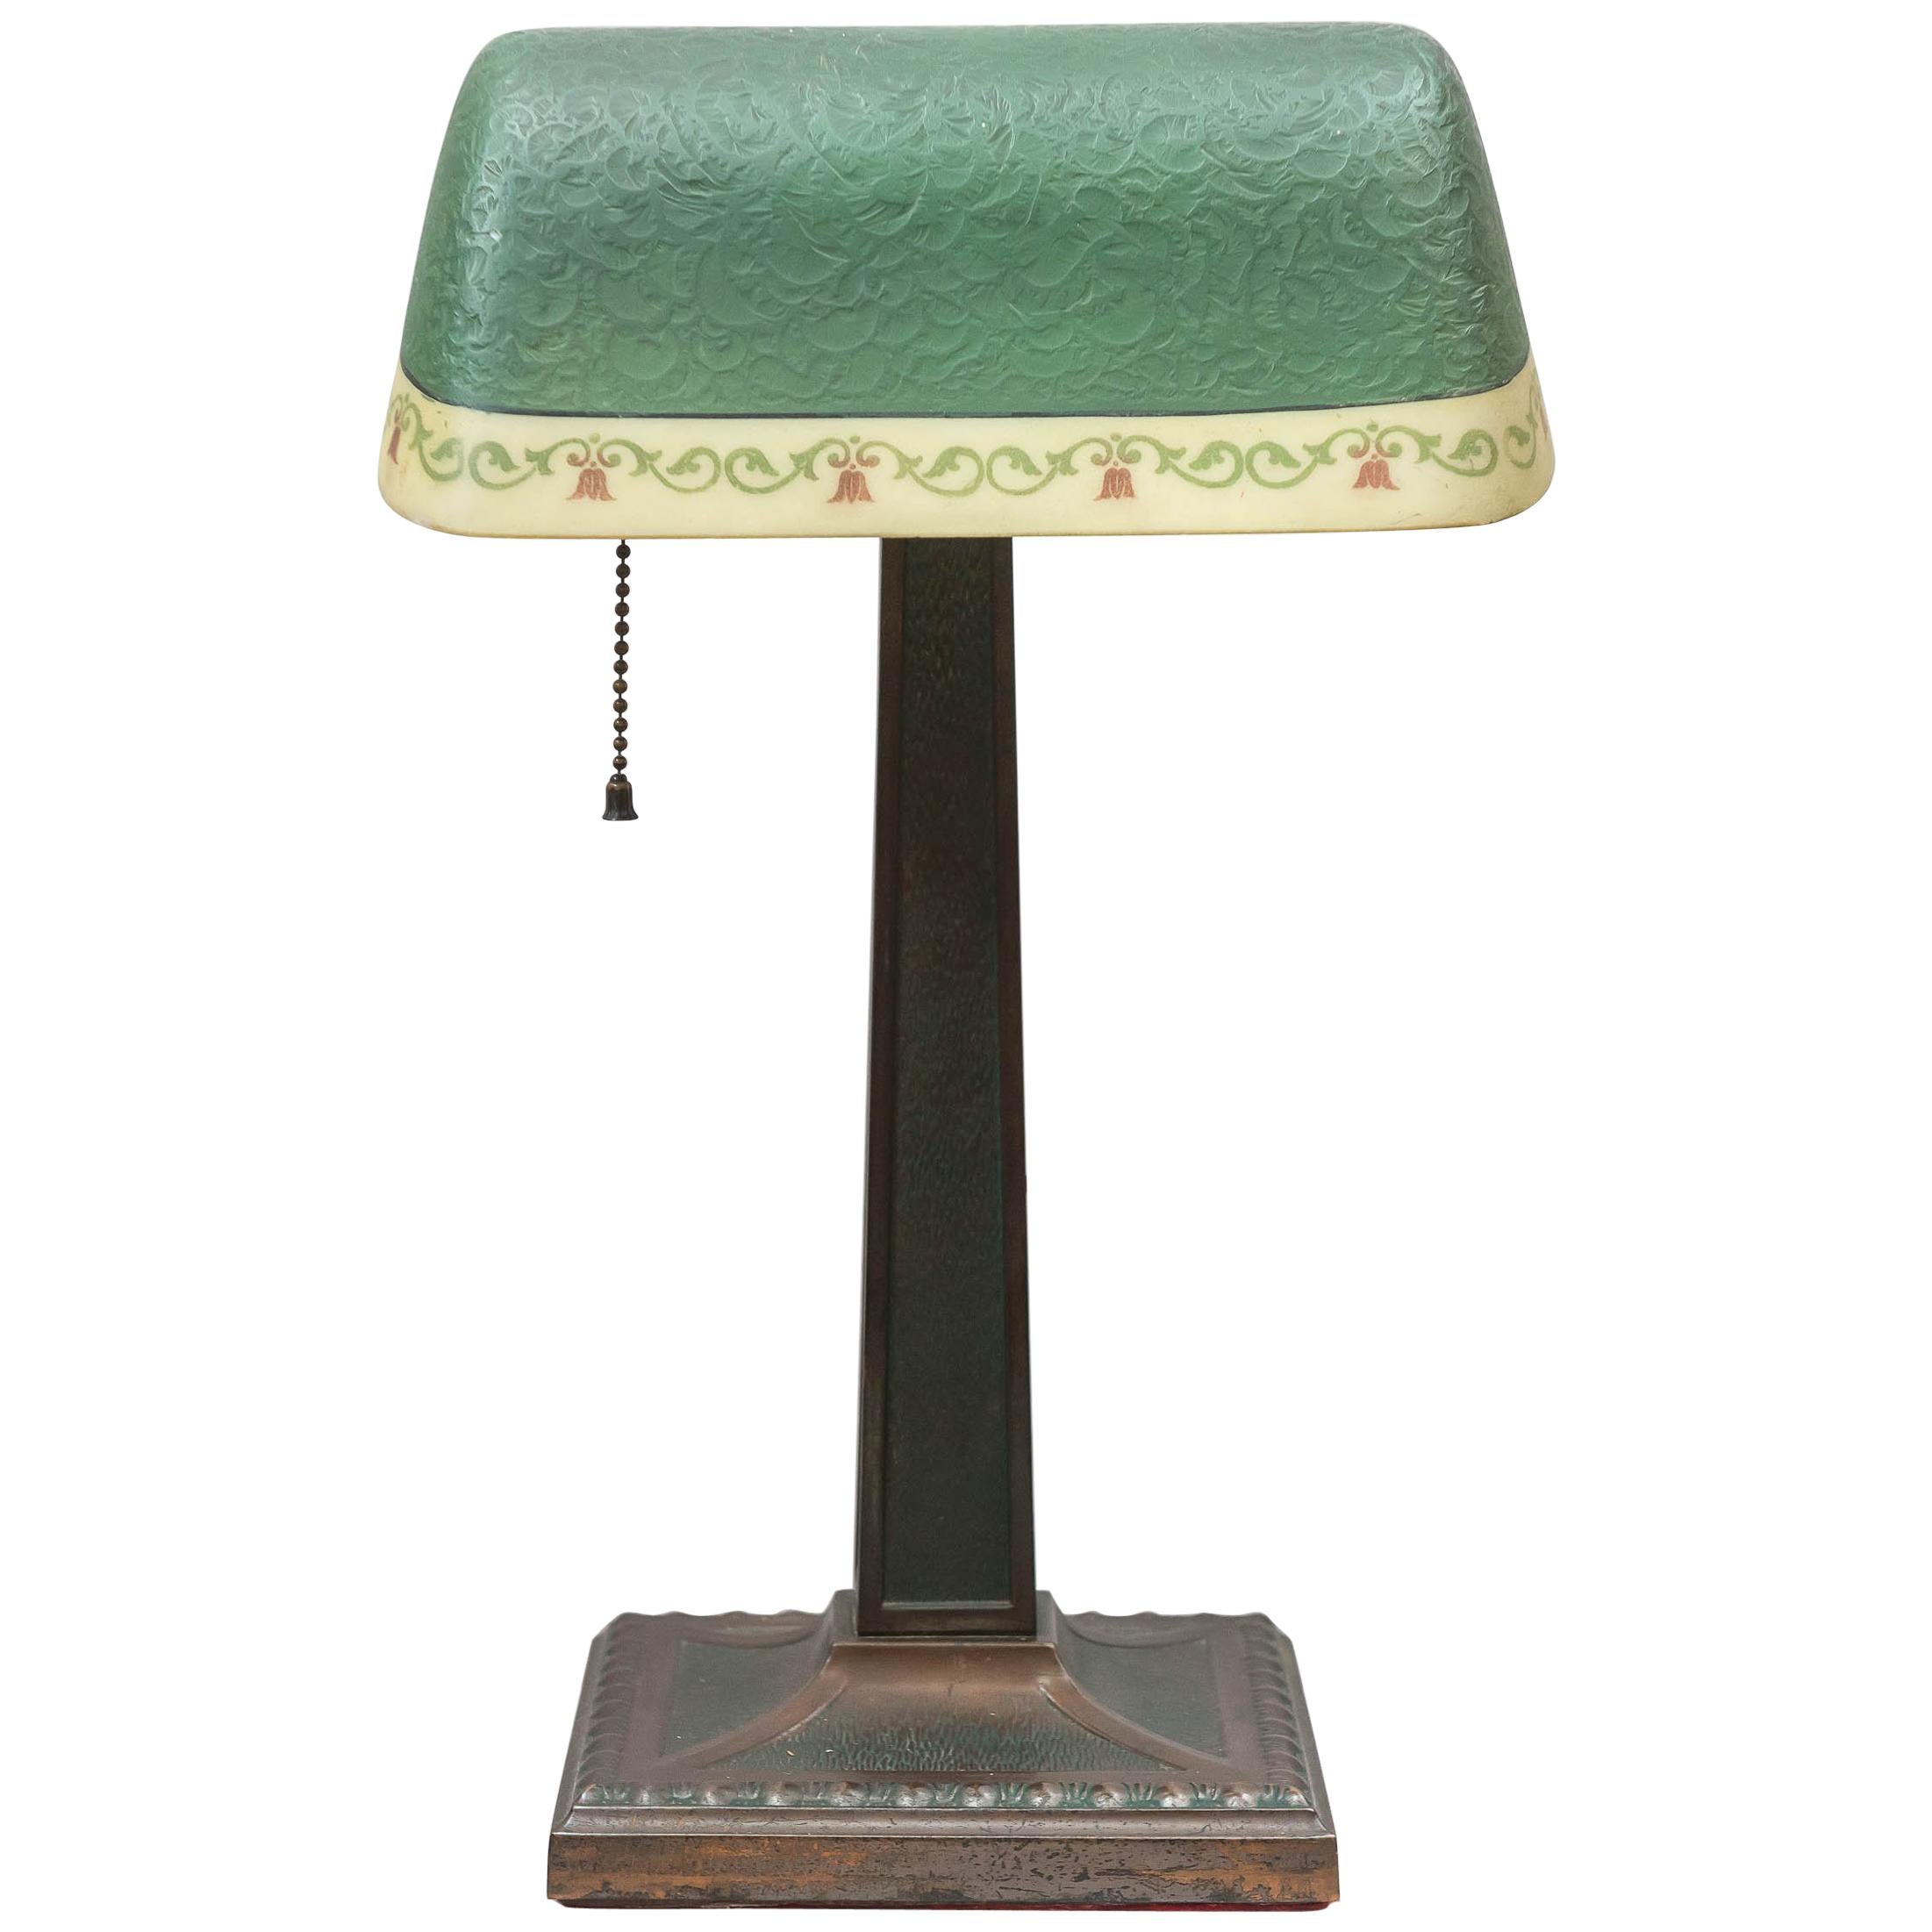 Antique Banker's Lamp with Original Glass Shade, Dated 1917